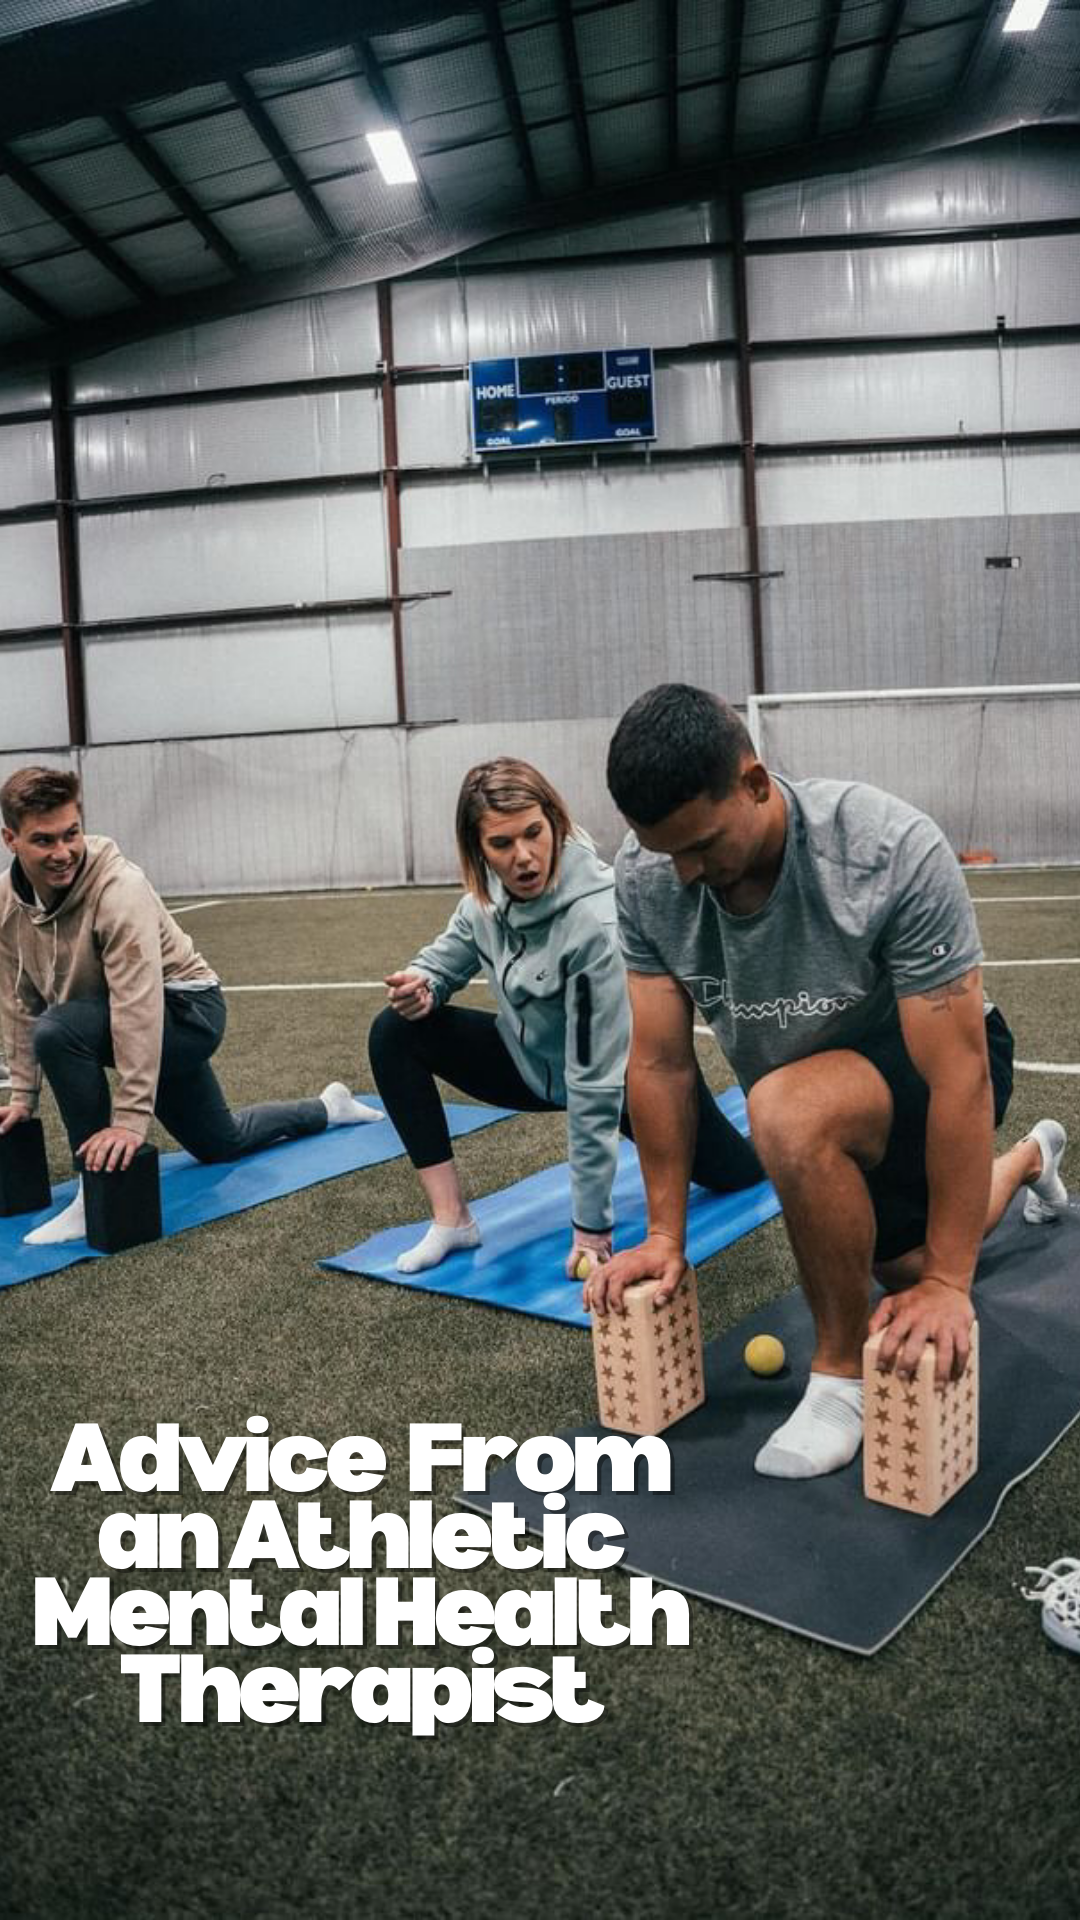 Advice from a Athletic Mental Health Therapist